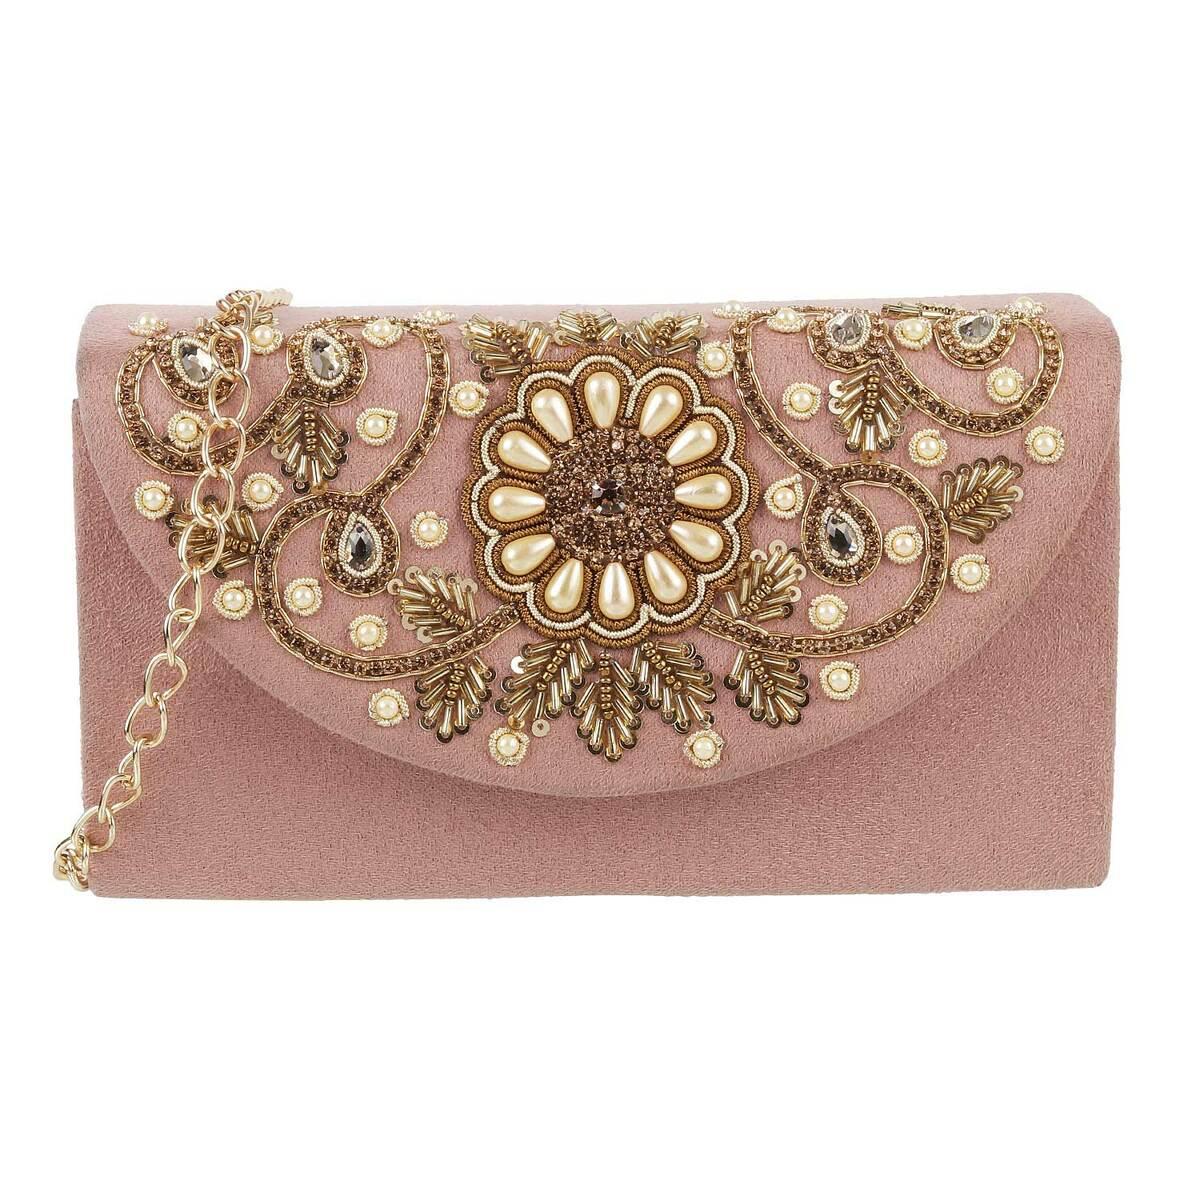 Clutch Sling Bag | Buy Clutch Sling Bags Online In India | Massi Miliano